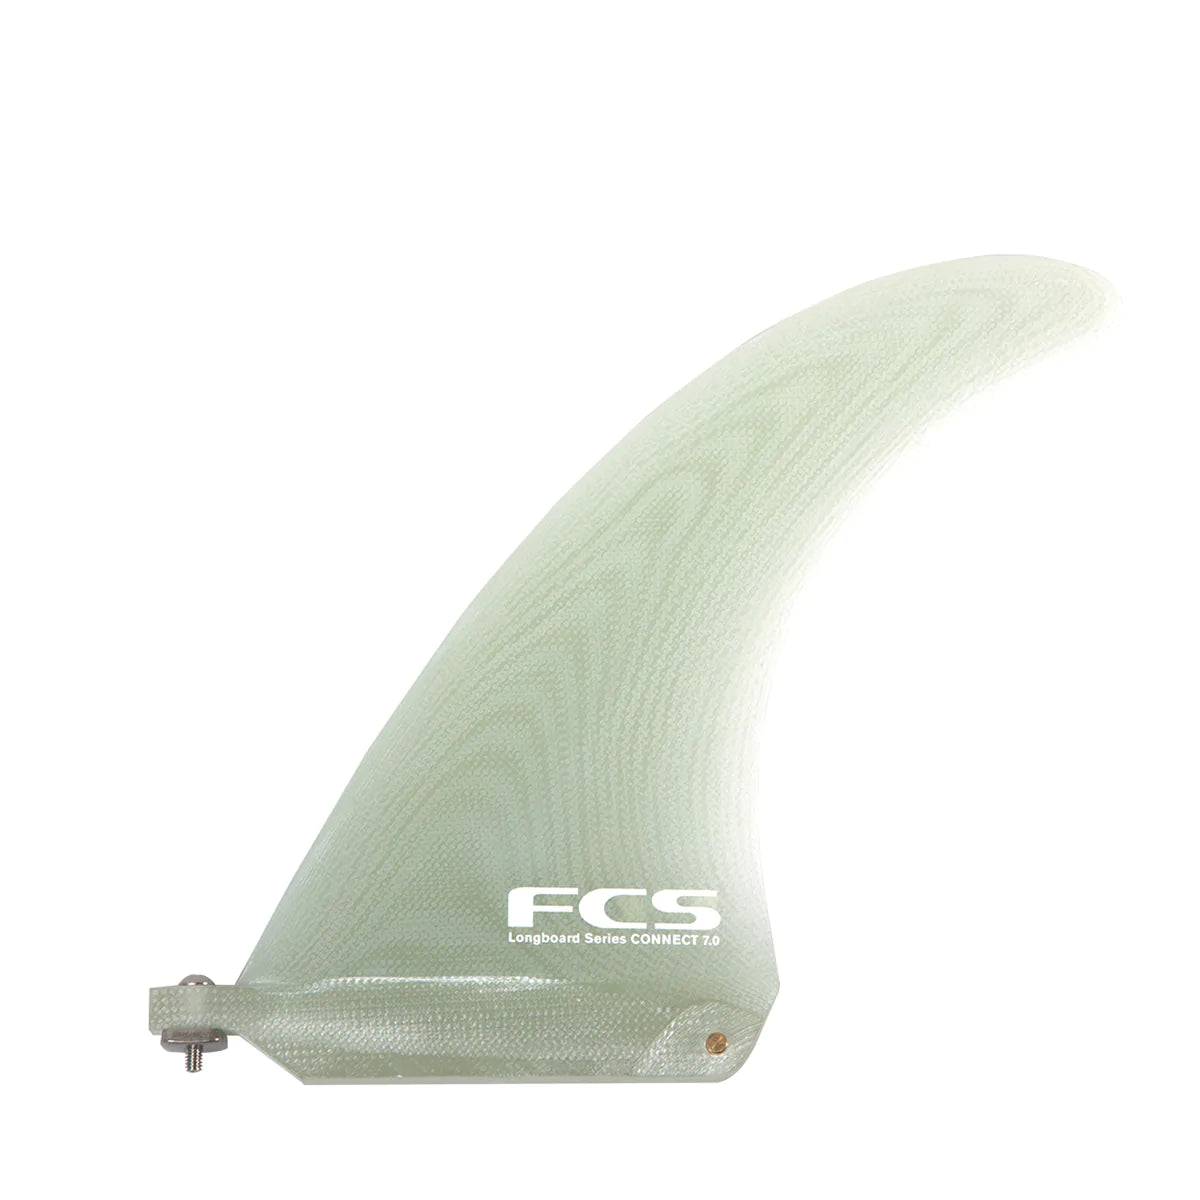 FCS Connect PG 8 Inch Longboard Fin Clear - Screw and Plate